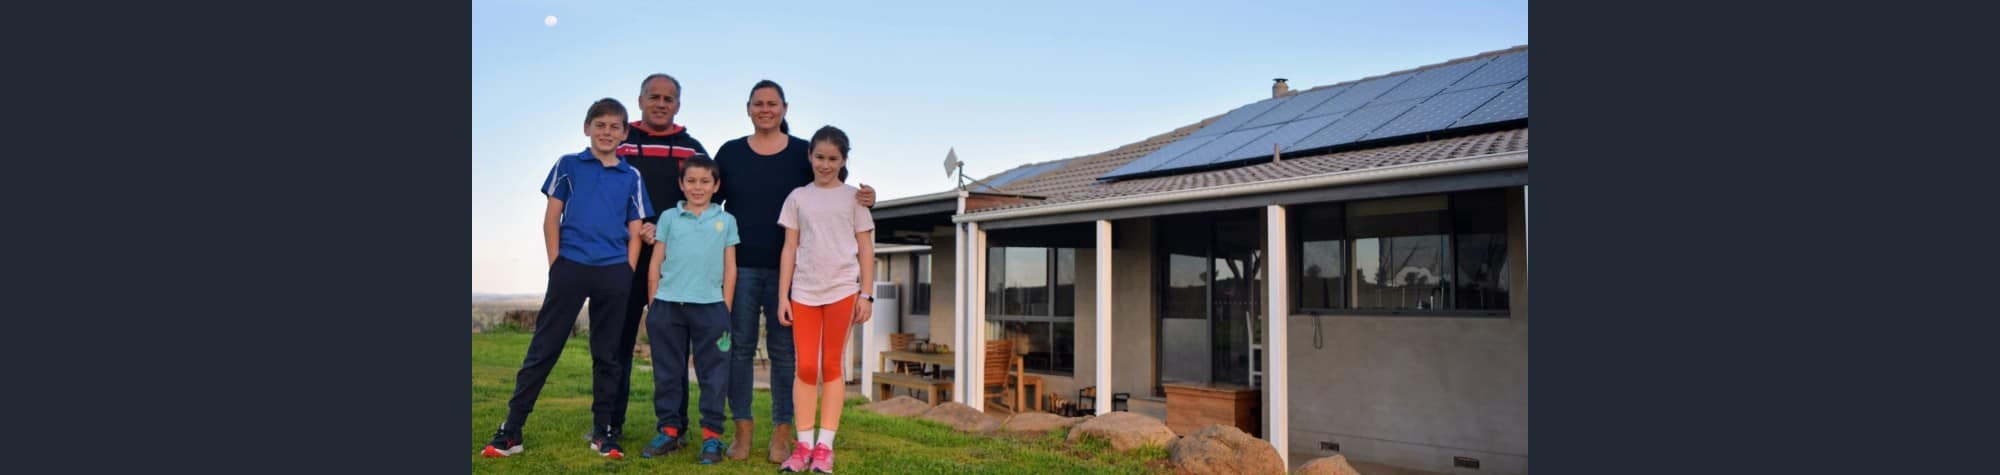 The Reynolds Family are Saving with Solar Power